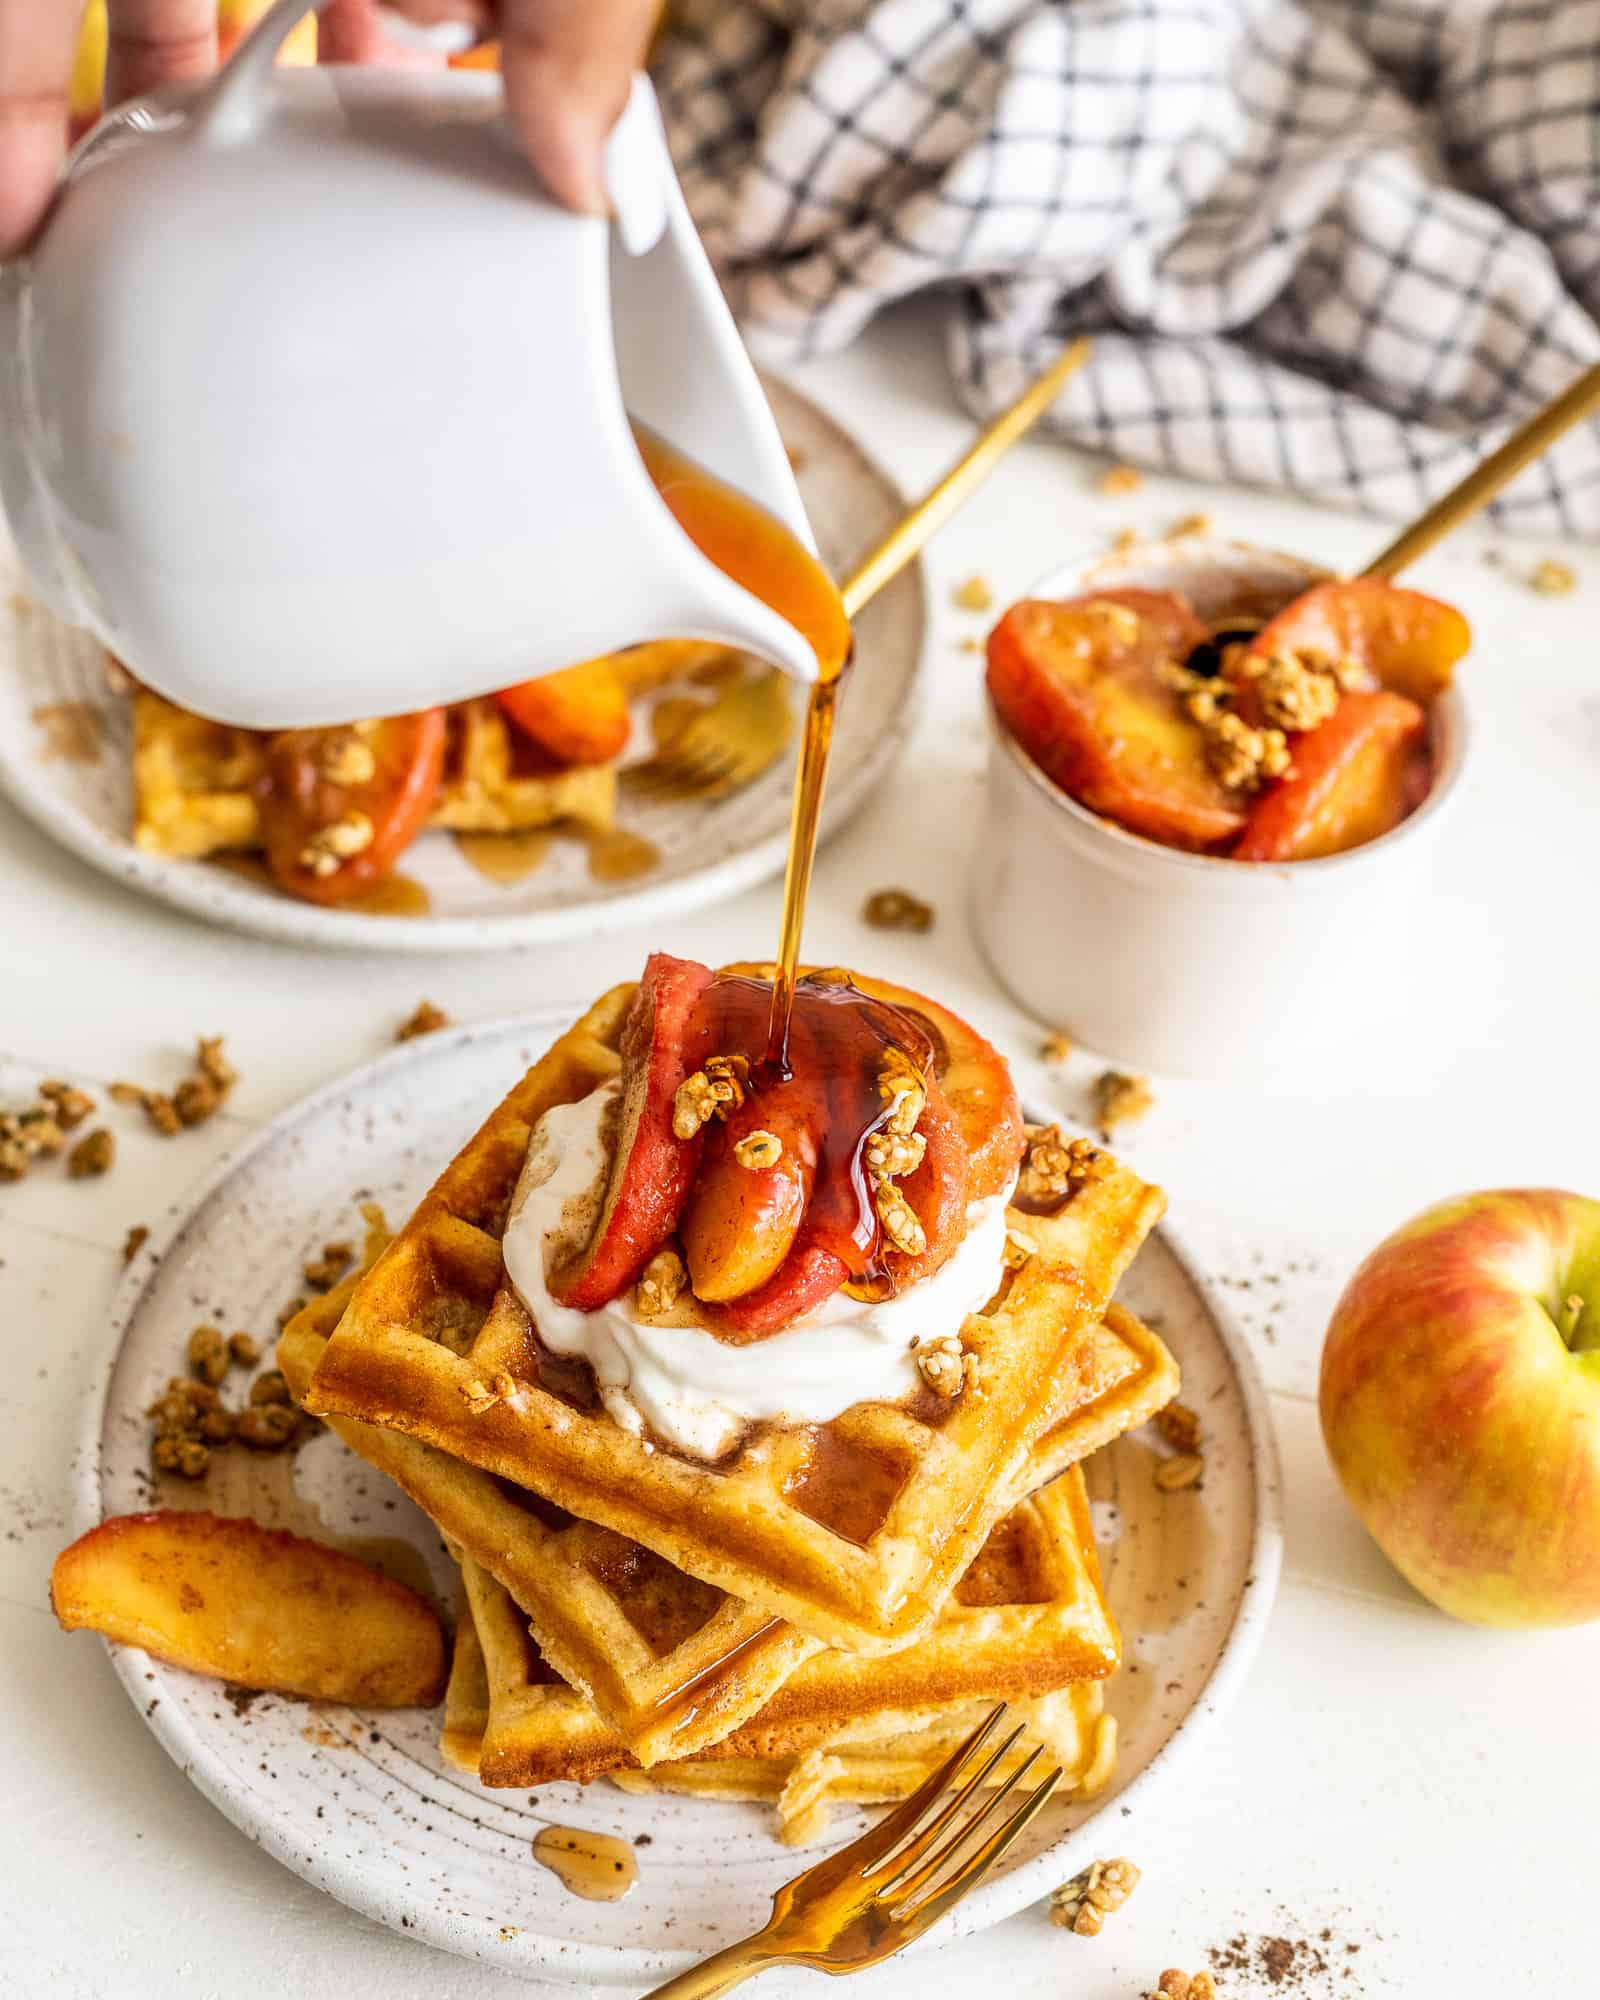 pouring syrup on top of waffles with cinnamon apples